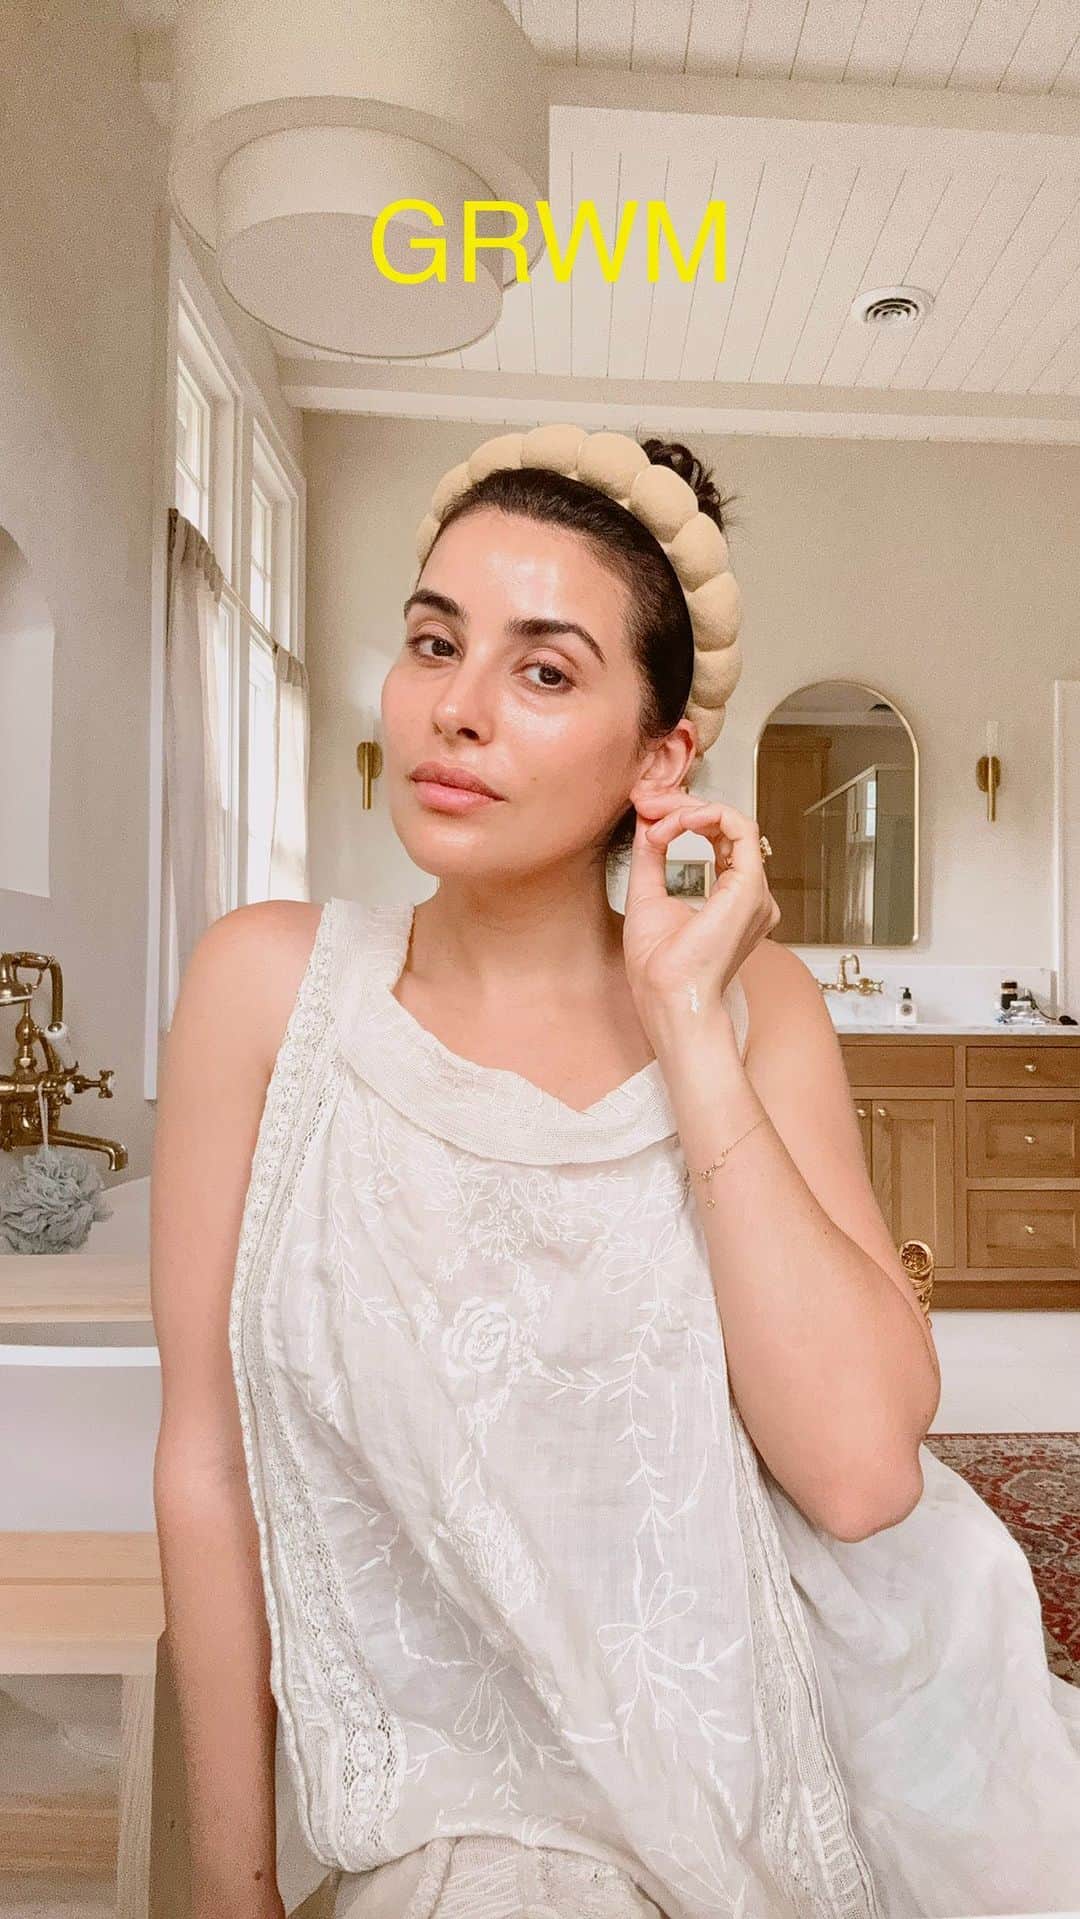 Sazan Hendrixのインスタグラム：「Mama’s microcurrent routine 💖 The FOREO BEAR 2 is keeping my skin game strong 🐻✨ I’ve been using this teeny tiny device more than 1x a week as a pick me up to help tackle inflammation on my jawline and help define the cheekbones 🤩   I want yall to try it so they’re gifting you up to 50% off their products when you use my link + an extra 5% with code SAZAN5. (This is their best Black Friday offer) Offer ends soon so tap the link in my bio✨Have you guys ever tried a facial toning device? LMK!  #metime #GlowingSkin #FOREOBEAR #FOREO #ForeoPartner」